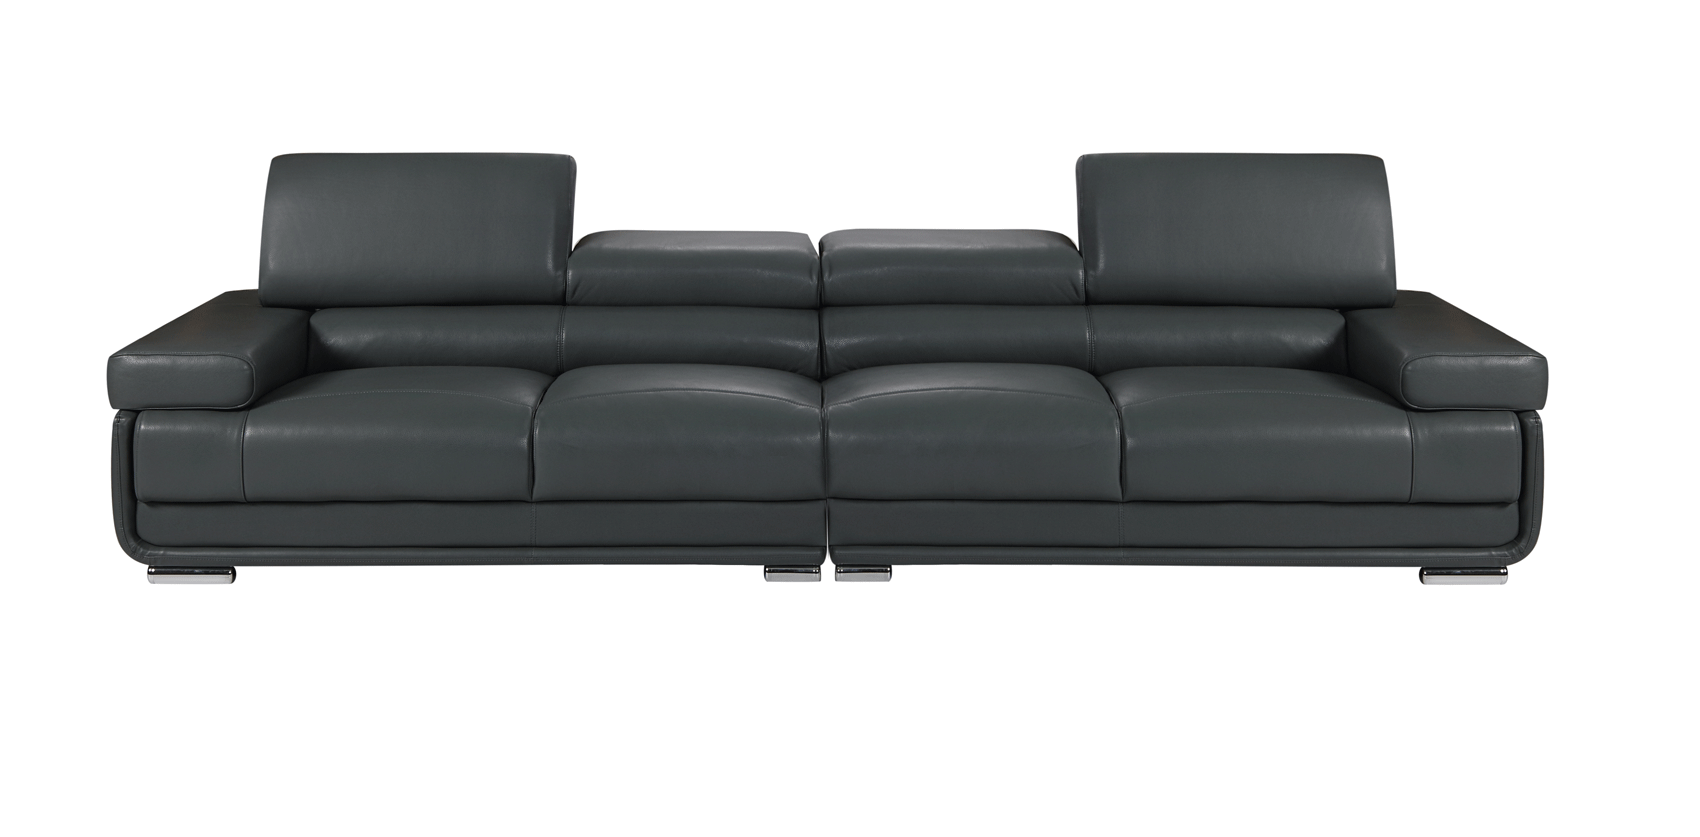 Brands SWH Modern Living Special Order 2119 Sofa, Loveseat, Chair